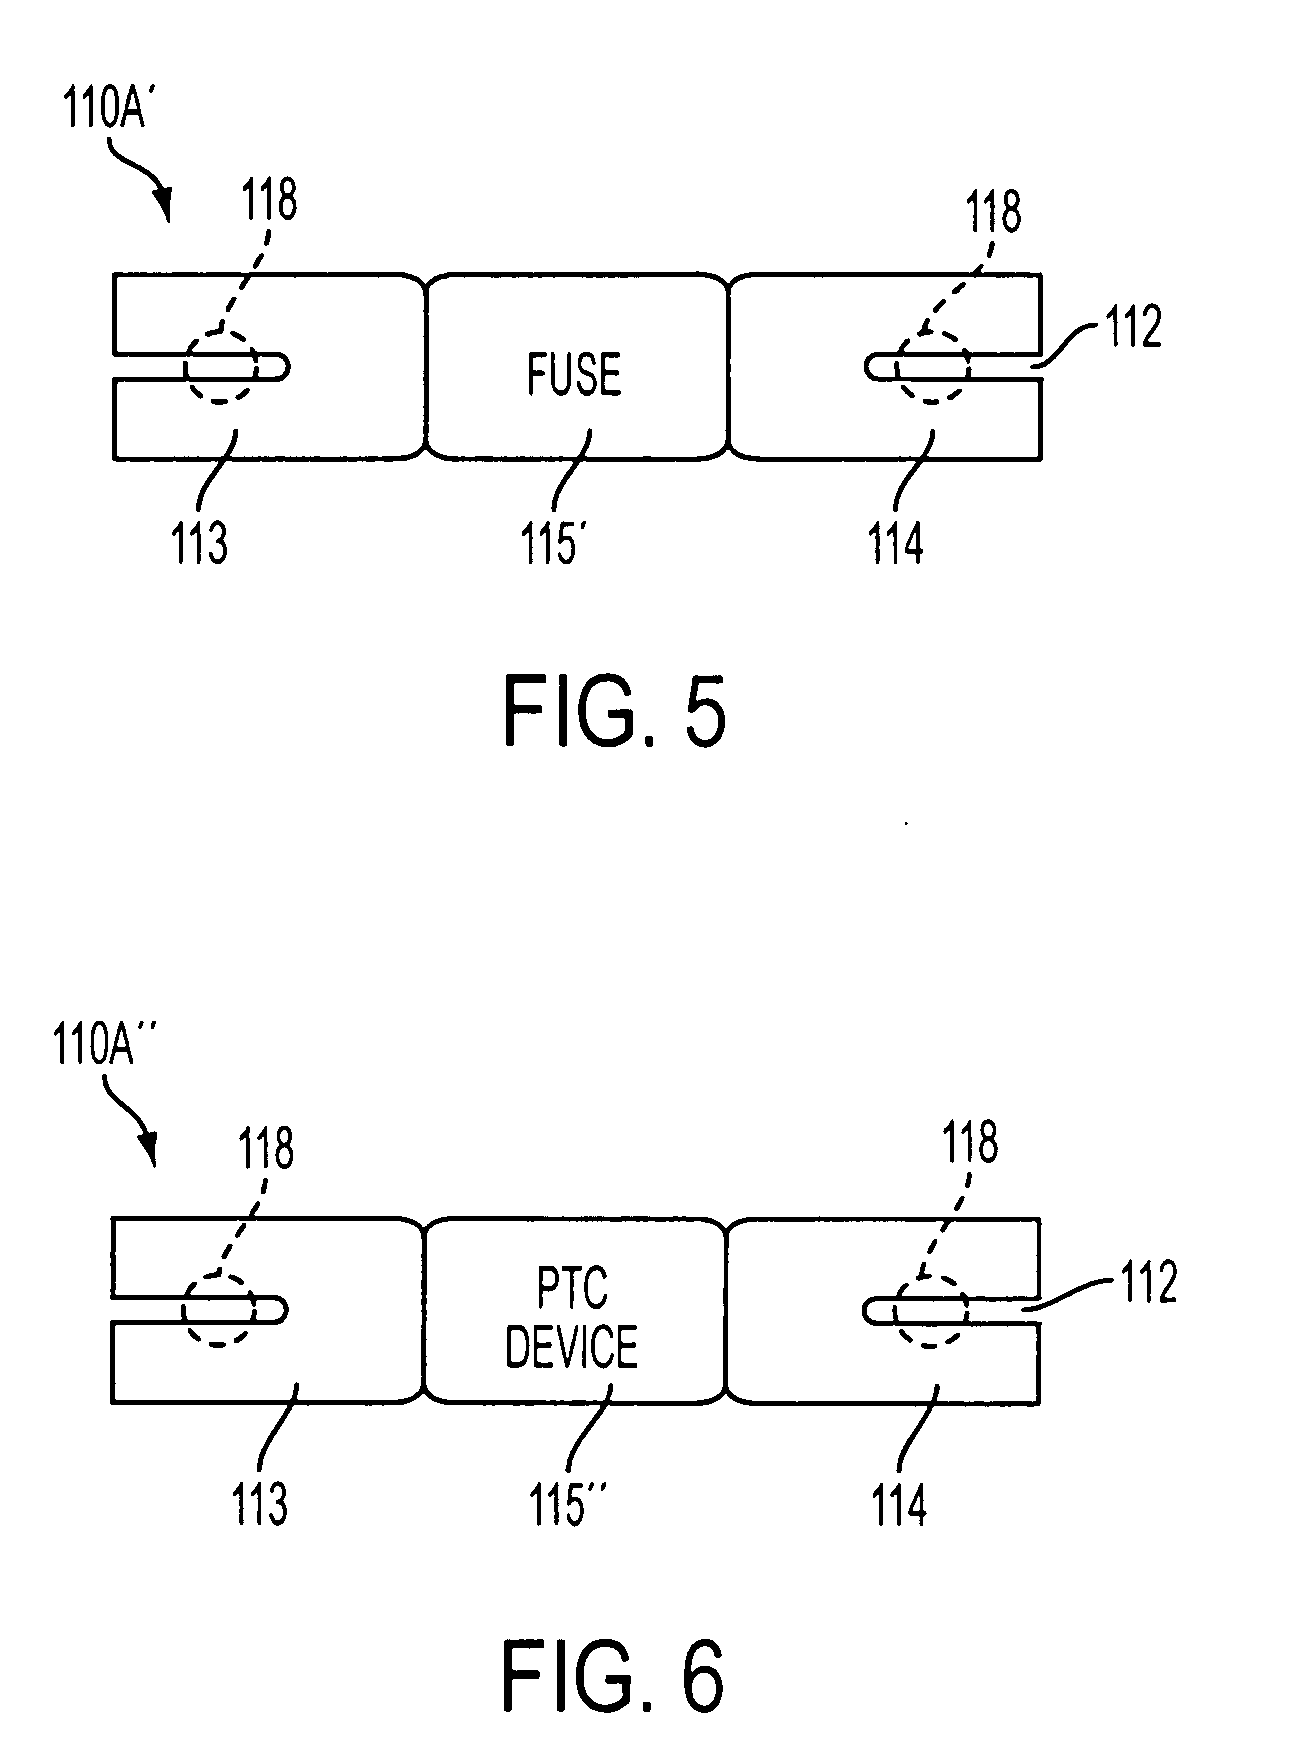 Cell connection straps for battery cells of a battery pack